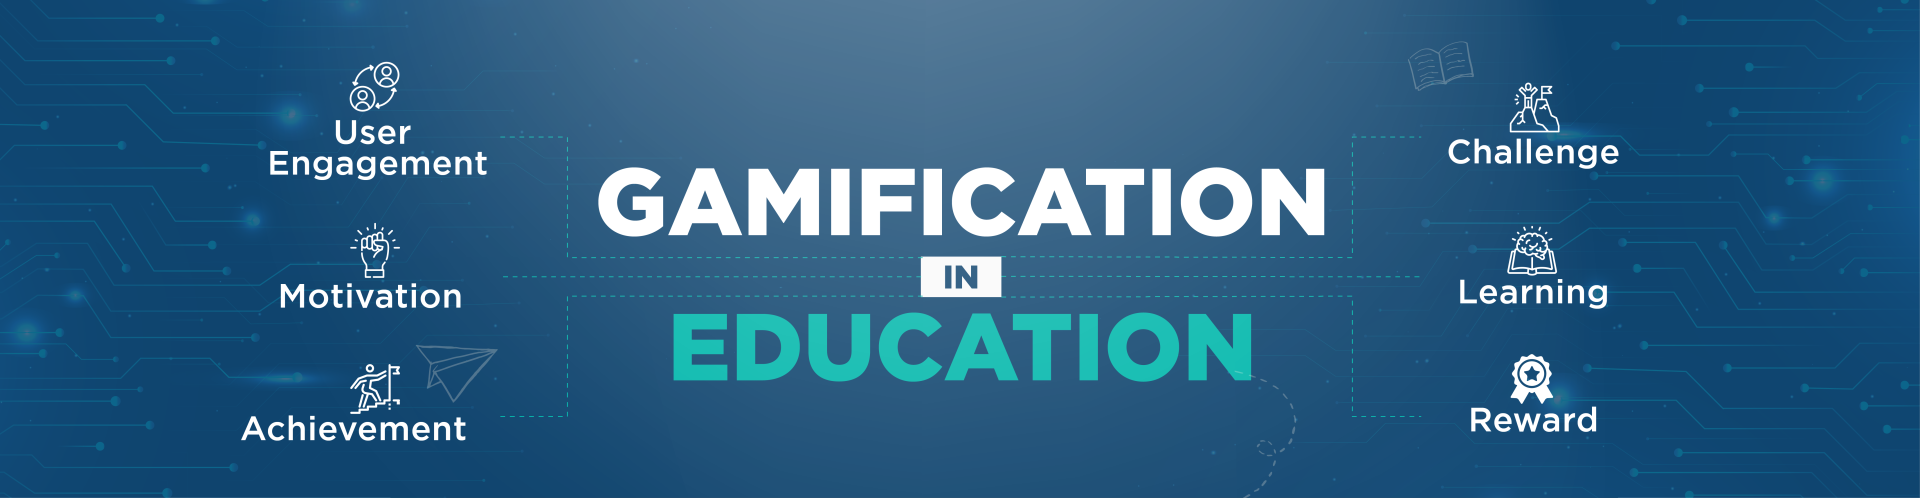 Gamification in education allows for adaptive learning pathways based on individual student performance.